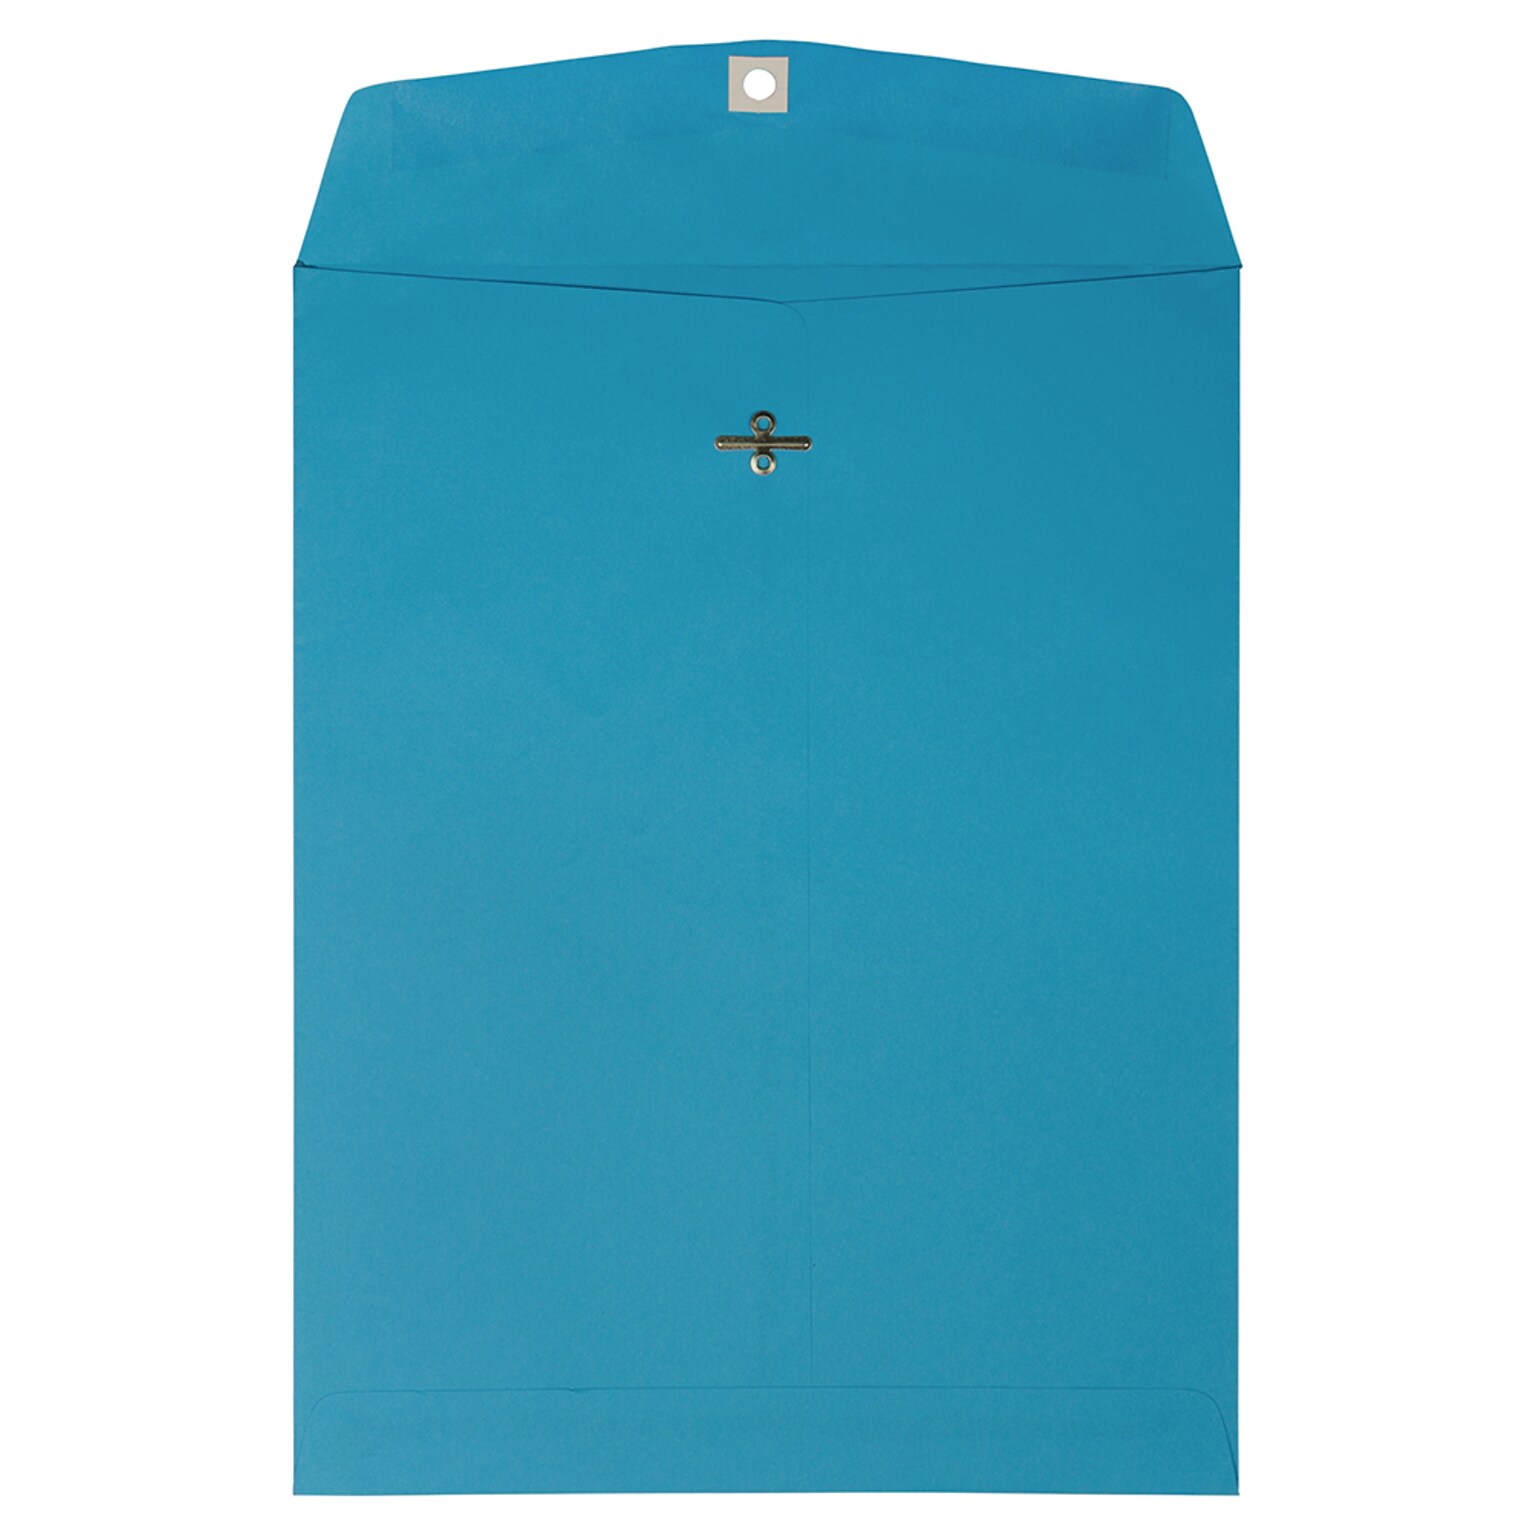 JAM Paper® 10 x 13 Open End Catalog Colored Envelopes with Clasp Closure, Blue Recycled, 25/Pack (87493a)